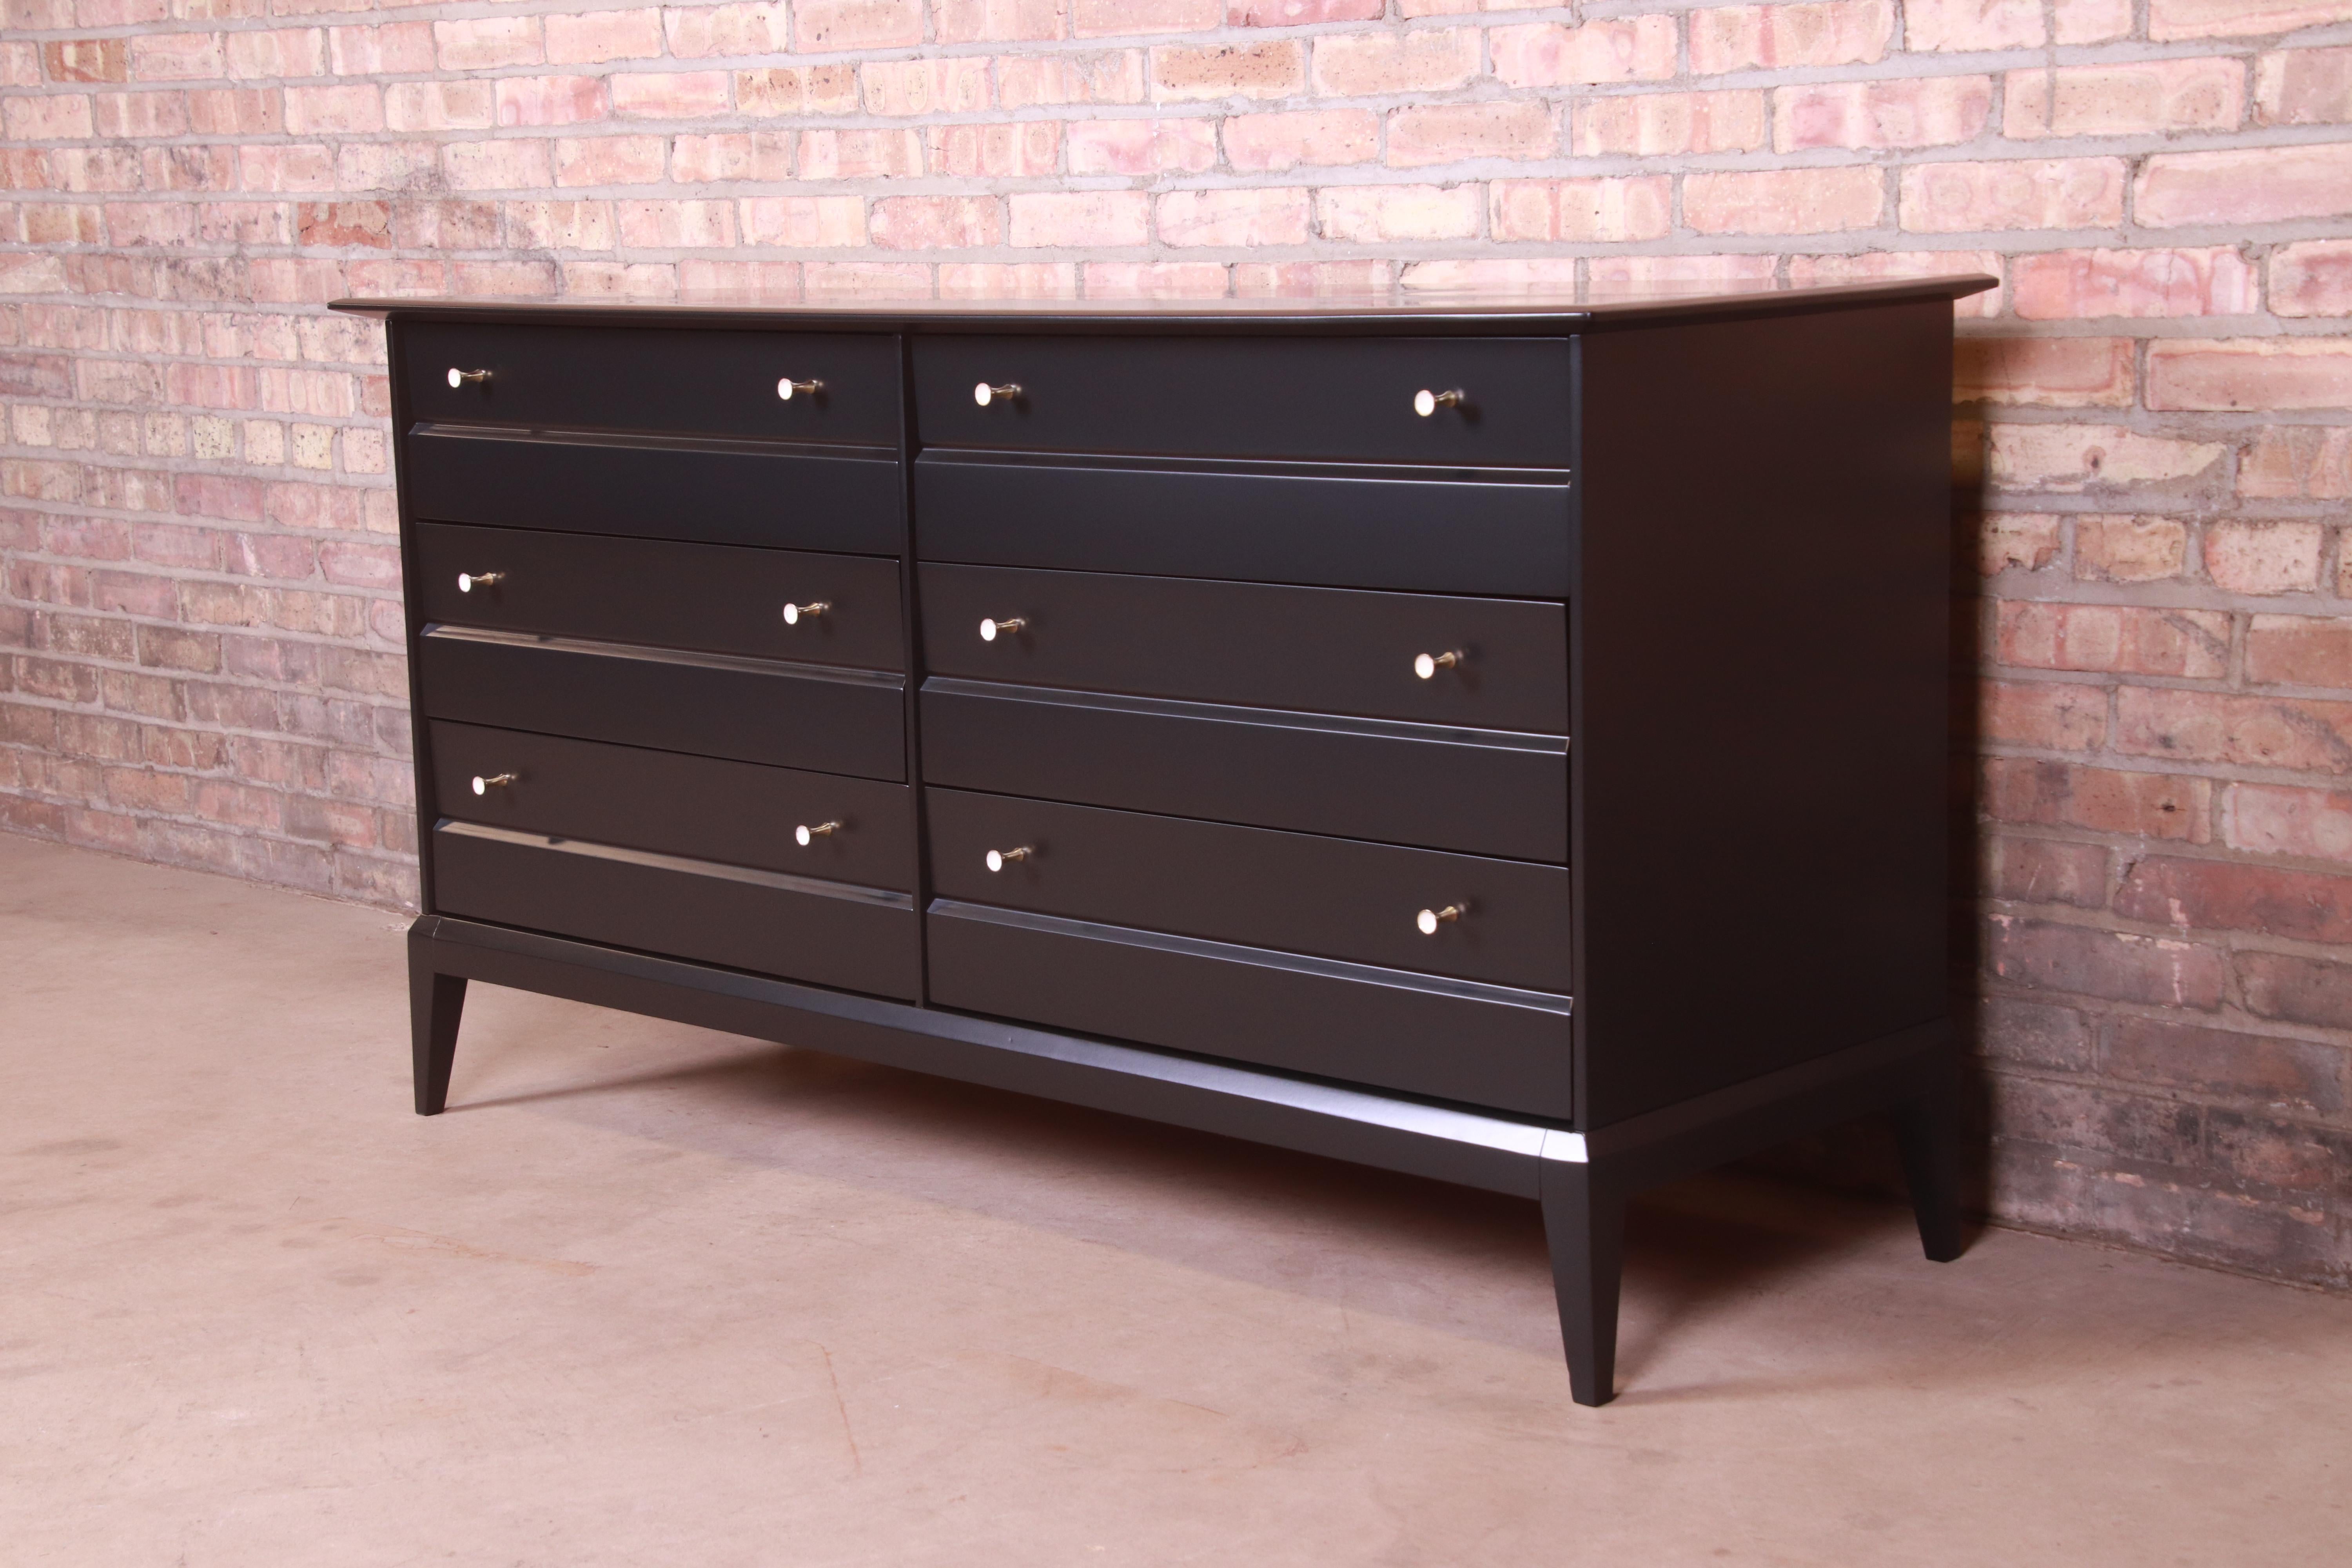 American Paul McCobb Style Black Lacquered Dresser by Heywood Wakefield, Newly Refinished